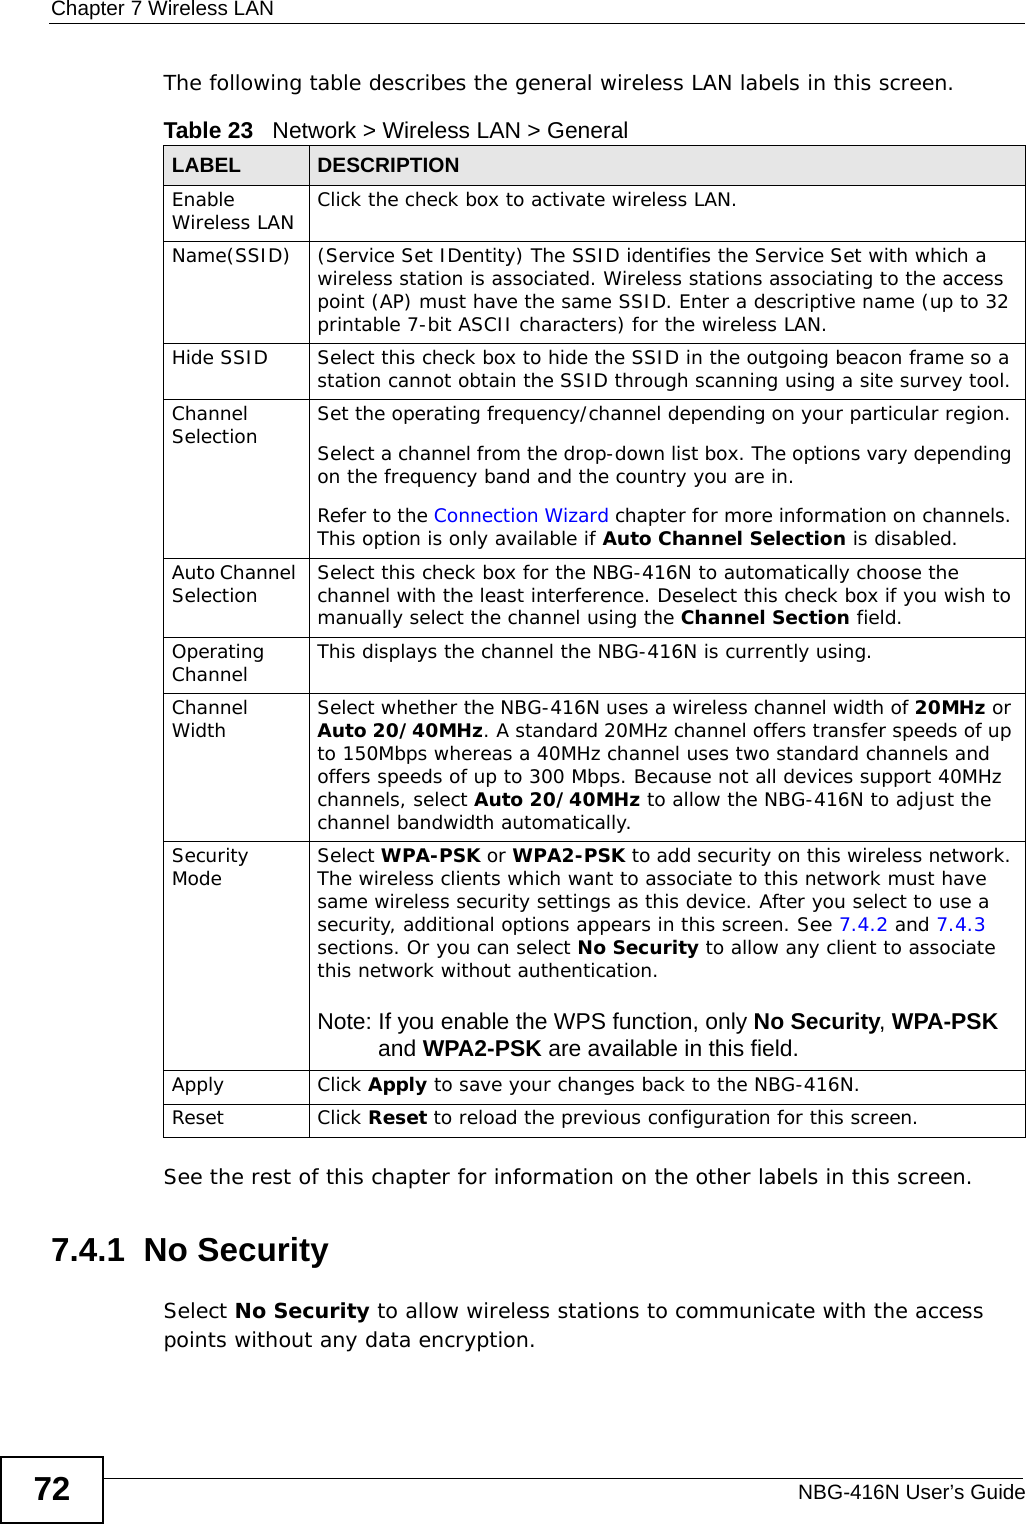 Chapter 7 Wireless LANNBG-416N User’s Guide72The following table describes the general wireless LAN labels in this screen.See the rest of this chapter for information on the other labels in this screen. 7.4.1  No SecuritySelect No Security to allow wireless stations to communicate with the access points without any data encryption. Table 23   Network &gt; Wireless LAN &gt; GeneralLABEL DESCRIPTIONEnable Wireless LAN Click the check box to activate wireless LAN.Name(SSID) (Service Set IDentity) The SSID identifies the Service Set with which a wireless station is associated. Wireless stations associating to the access point (AP) must have the same SSID. Enter a descriptive name (up to 32 printable 7-bit ASCII characters) for the wireless LAN. Hide SSID Select this check box to hide the SSID in the outgoing beacon frame so a station cannot obtain the SSID through scanning using a site survey tool.Channel Selection Set the operating frequency/channel depending on your particular region. Select a channel from the drop-down list box. The options vary depending on the frequency band and the country you are in.Refer to the Connection Wizard chapter for more information on channels. This option is only available if Auto Channel Selection is disabled.Auto Channel Selection Select this check box for the NBG-416N to automatically choose the channel with the least interference. Deselect this check box if you wish to manually select the channel using the Channel Section field.Operating Channel  This displays the channel the NBG-416N is currently using.Channel Width Select whether the NBG-416N uses a wireless channel width of 20MHz or Auto 20/40MHz. A standard 20MHz channel offers transfer speeds of up to 150Mbps whereas a 40MHz channel uses two standard channels and offers speeds of up to 300 Mbps. Because not all devices support 40MHz channels, select Auto 20/40MHz to allow the NBG-416N to adjust the channel bandwidth automatically.Security Mode Select WPA-PSK or WPA2-PSK to add security on this wireless network. The wireless clients which want to associate to this network must have same wireless security settings as this device. After you select to use a security, additional options appears in this screen. See 7.4.2 and 7.4.3 sections. Or you can select No Security to allow any client to associate this network without authentication.Note: If you enable the WPS function, only No Security, WPA-PSK and WPA2-PSK are available in this field.Apply Click Apply to save your changes back to the NBG-416N.Reset Click Reset to reload the previous configuration for this screen.